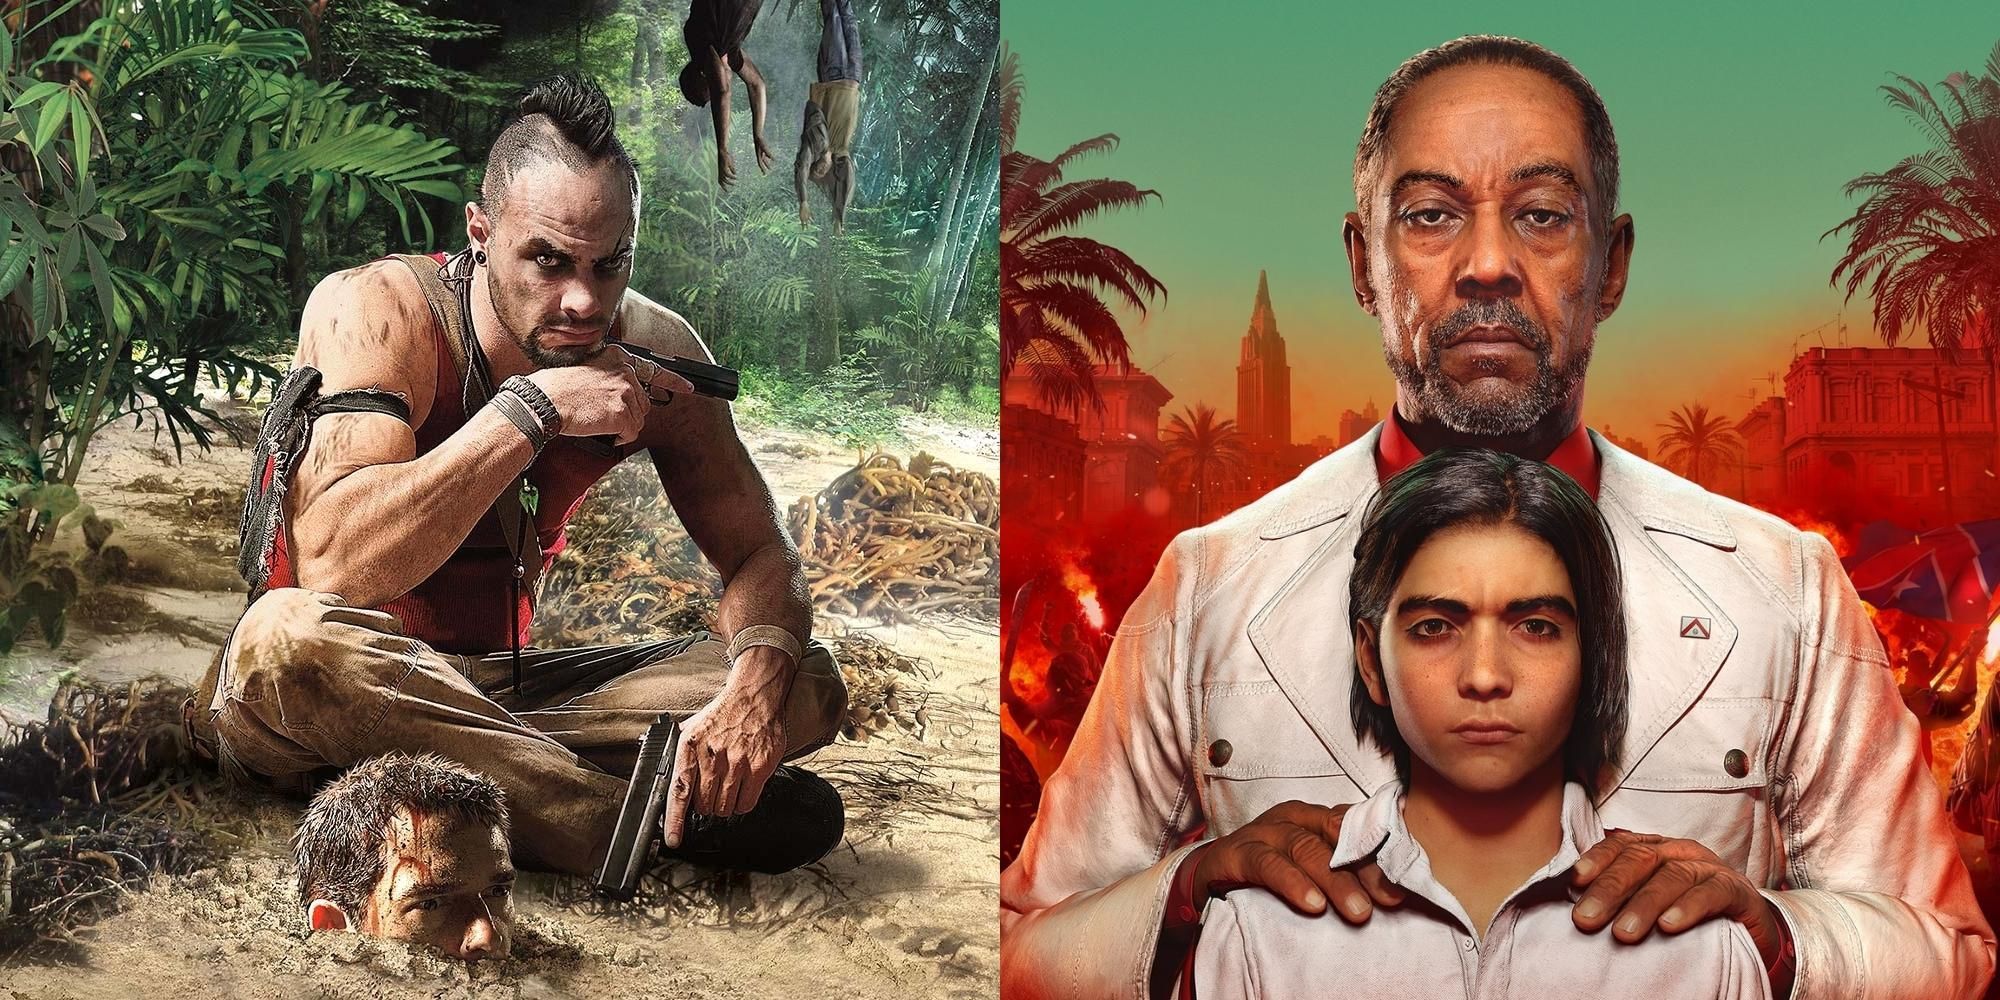 Far Cry 3 and 6 both have frightening villains, but Vaas and Castillo are still very different.